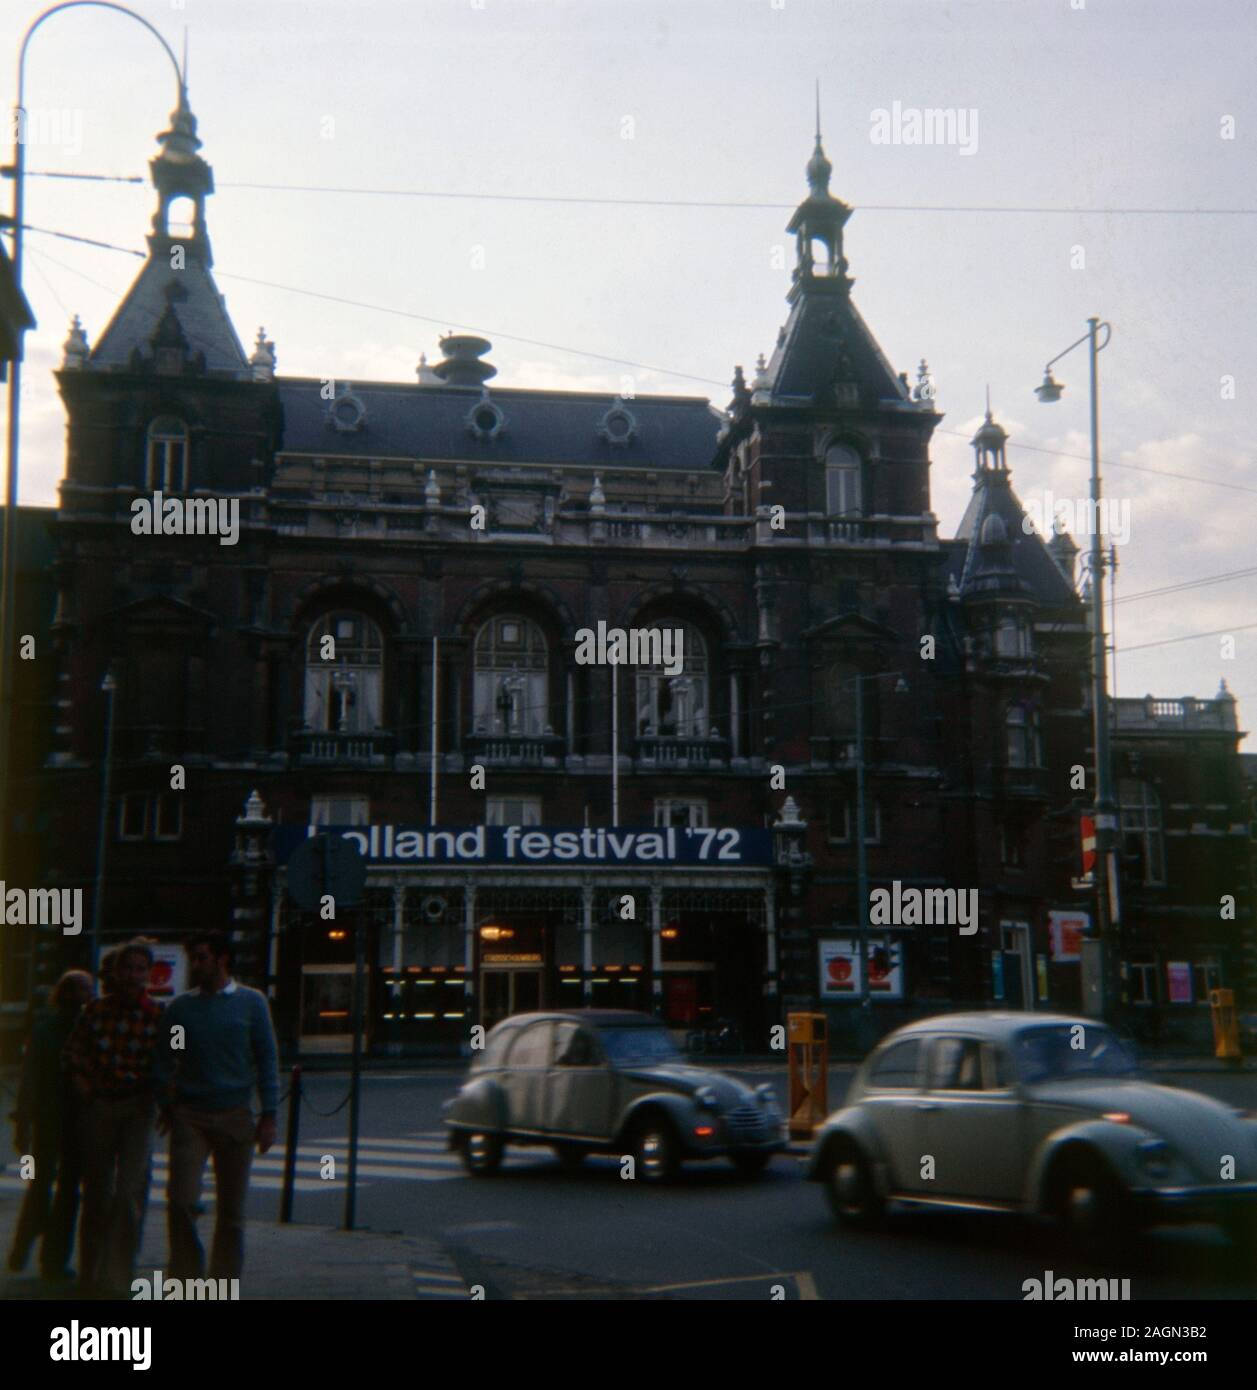 Vintage circa 1972 photograph, building in Amsterdam, Netherlands, with banner for Holland Festival ’72. SOURCE: ORIGINAL TRANSPARENCY. Stock Photo